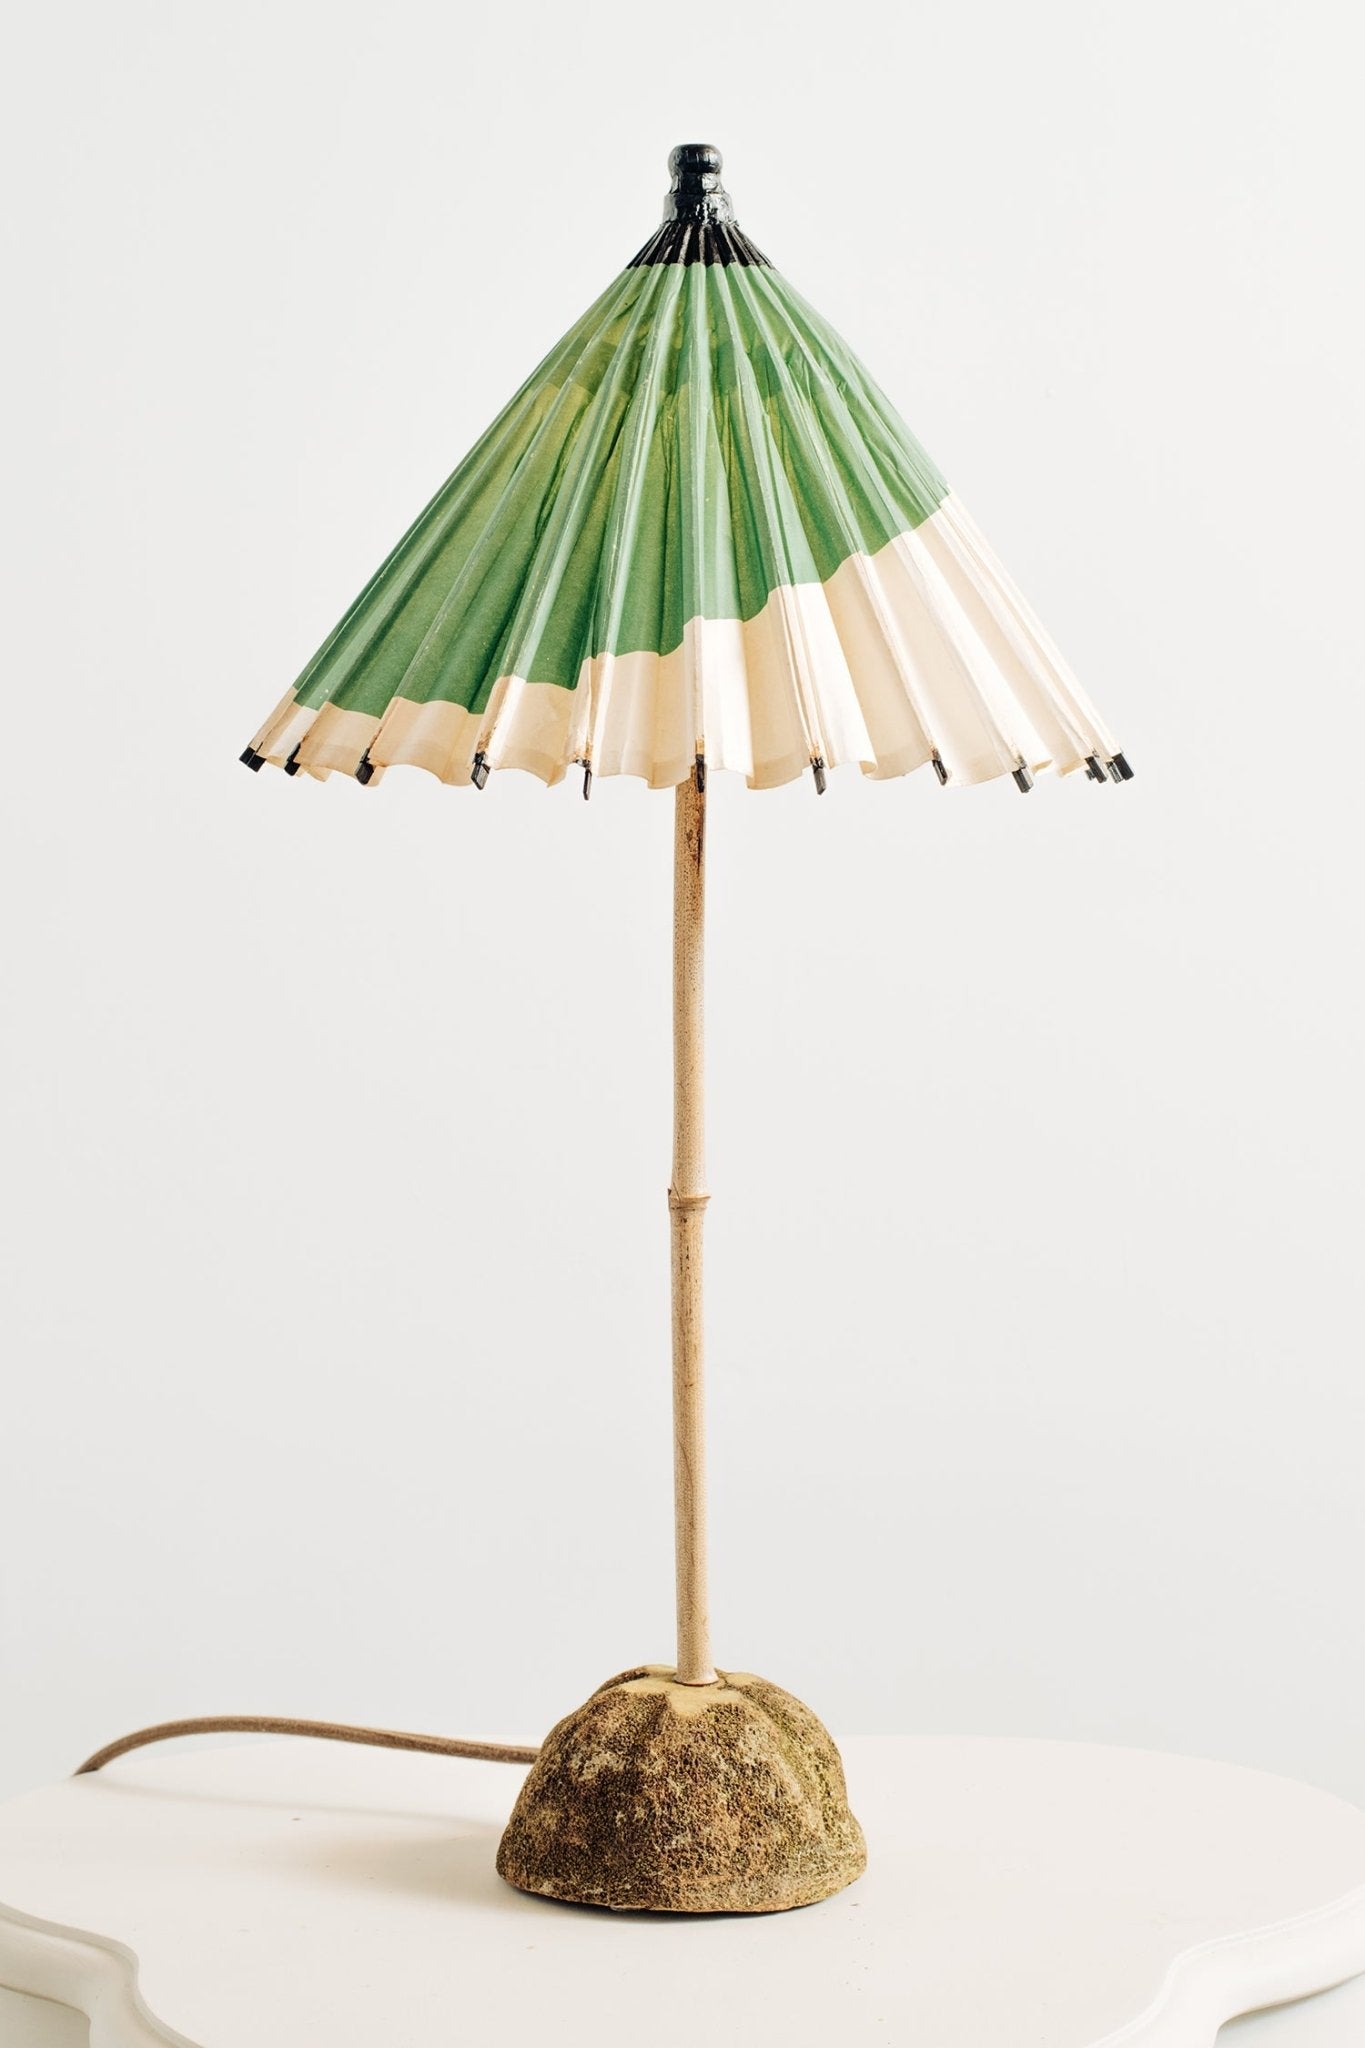 1933 Chicago 'World's Fair' Bamboo Table Lamp with Parasol Shade and Coconut Base — Model No. 003 - Tennant New York